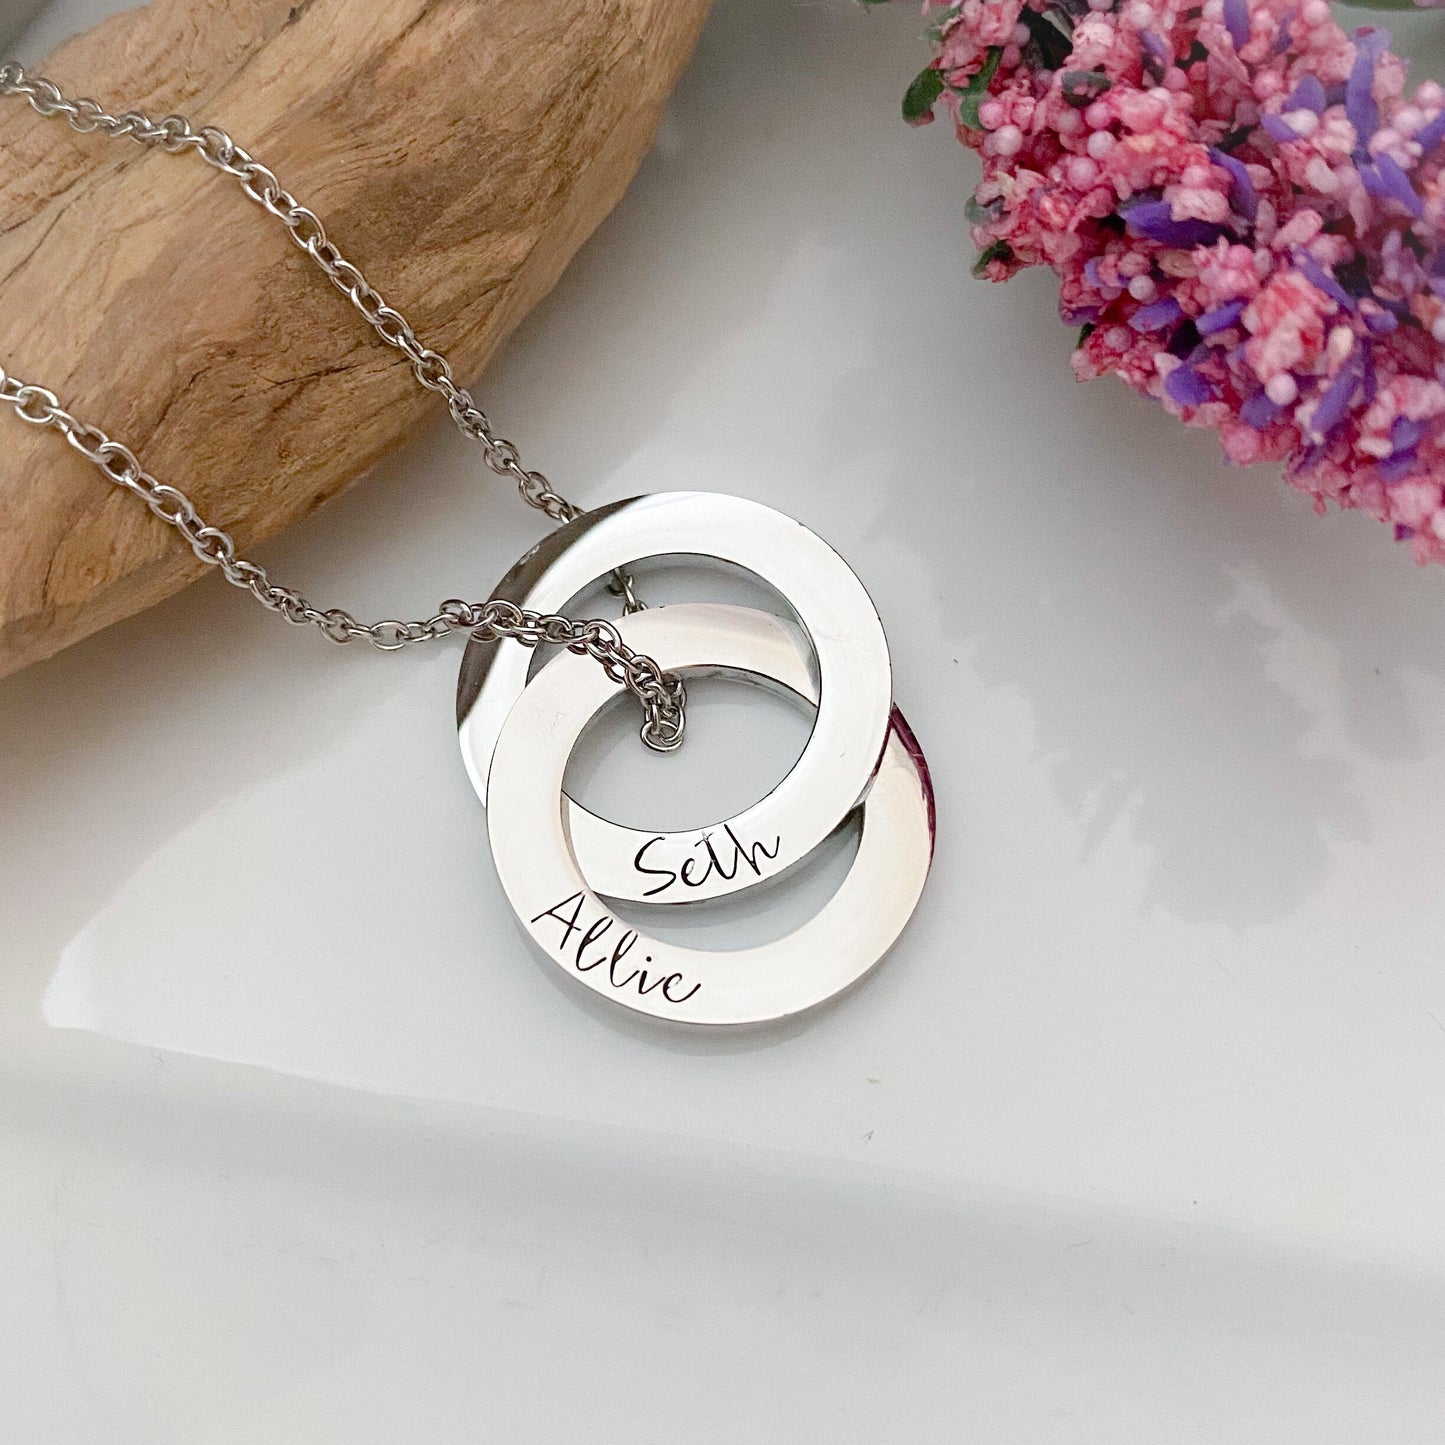 2 Ring necklace--Mothers Name Necklace--Interlocking Ring Necklace